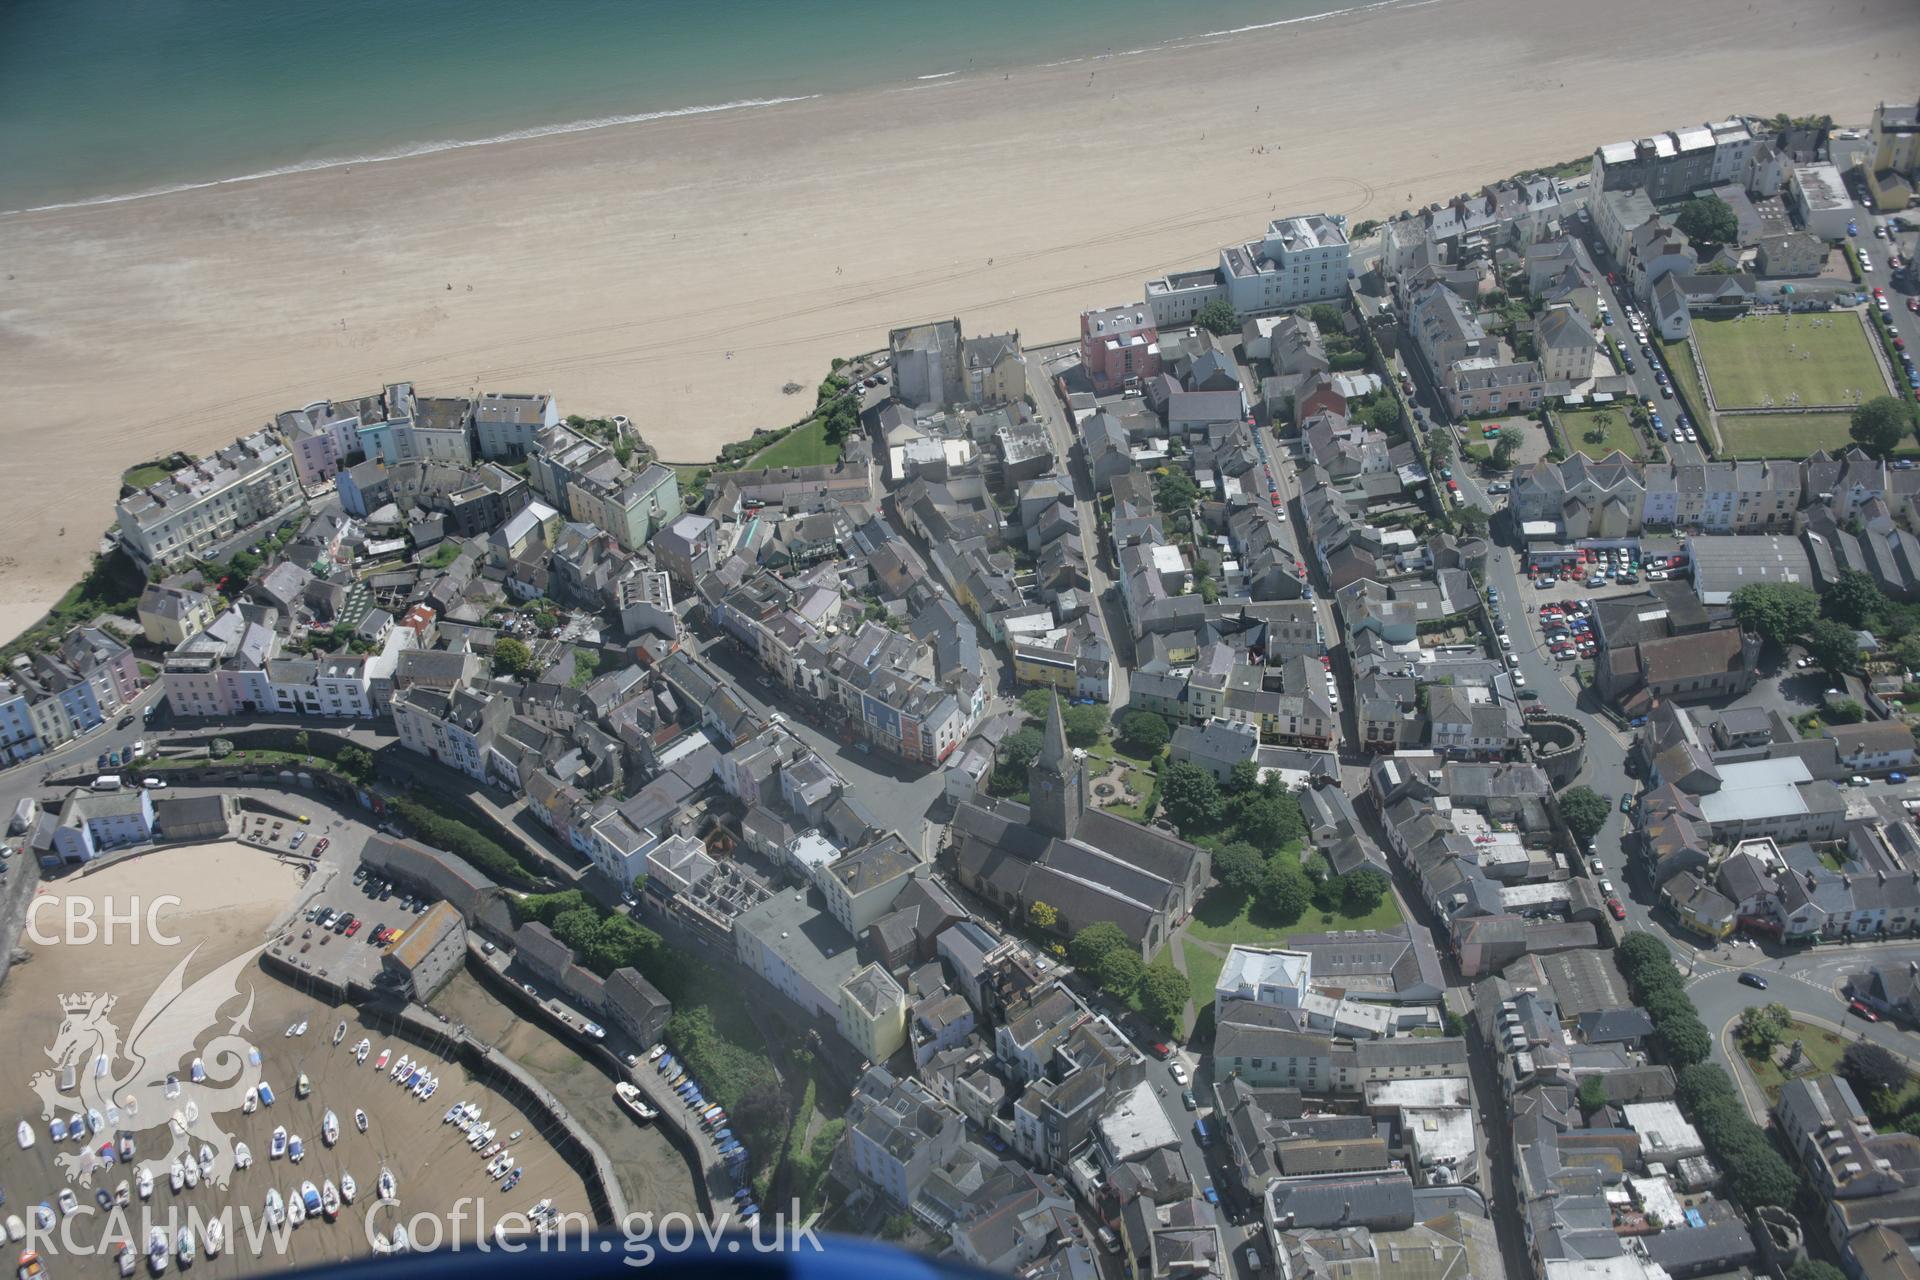 RCAHMW colour oblique aerial photograph of Tenby from the north showing the town and its walls. Taken on 22 June 2005 by Toby Driver